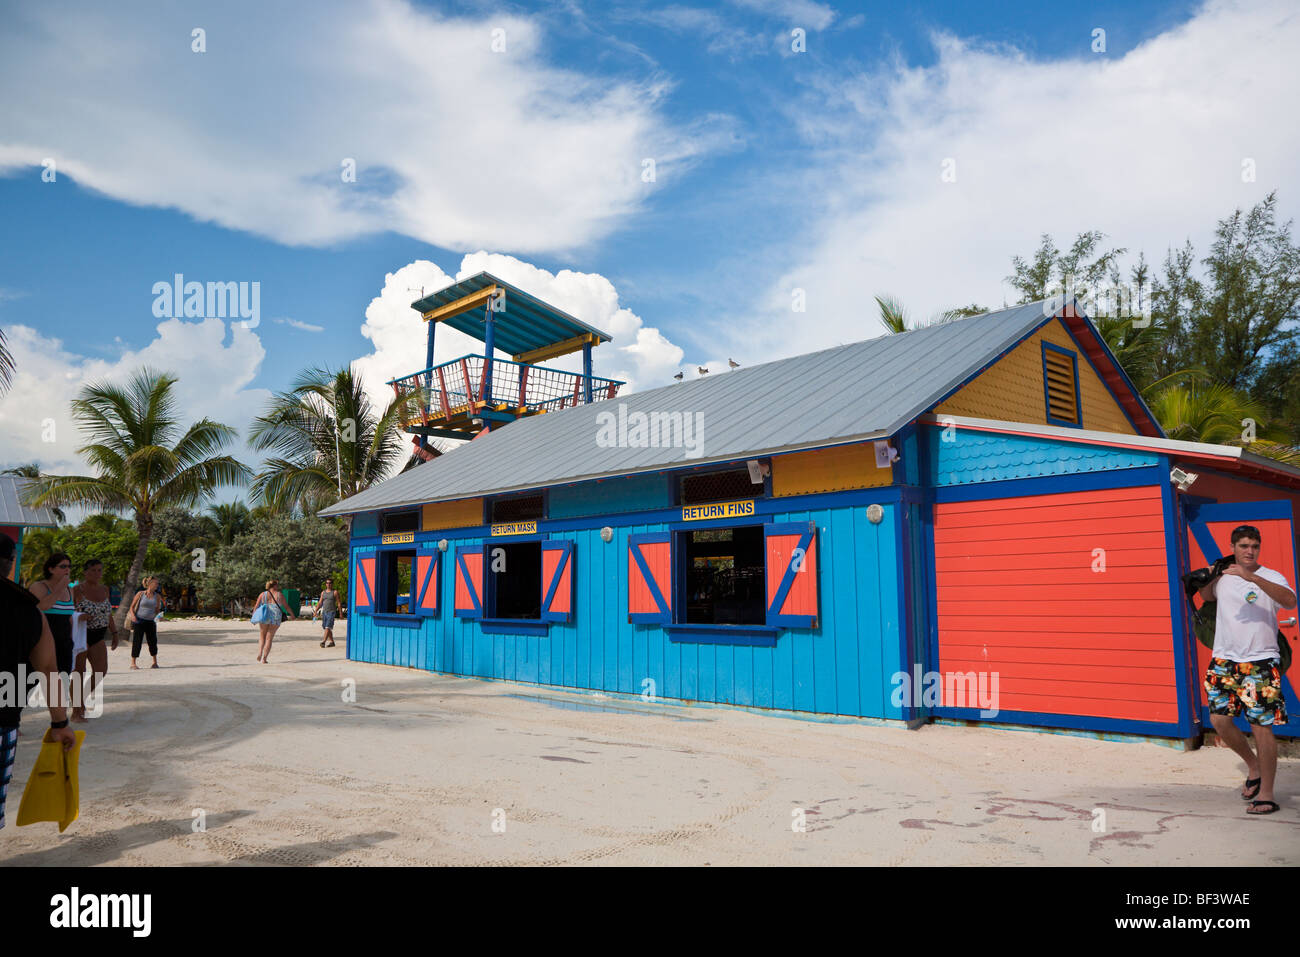 Coco Cay, Bahamas - August 2008 - Brightly painted colorful building used for renting snorkeling equipment at Coco Cay, Bahamas Stock Photo